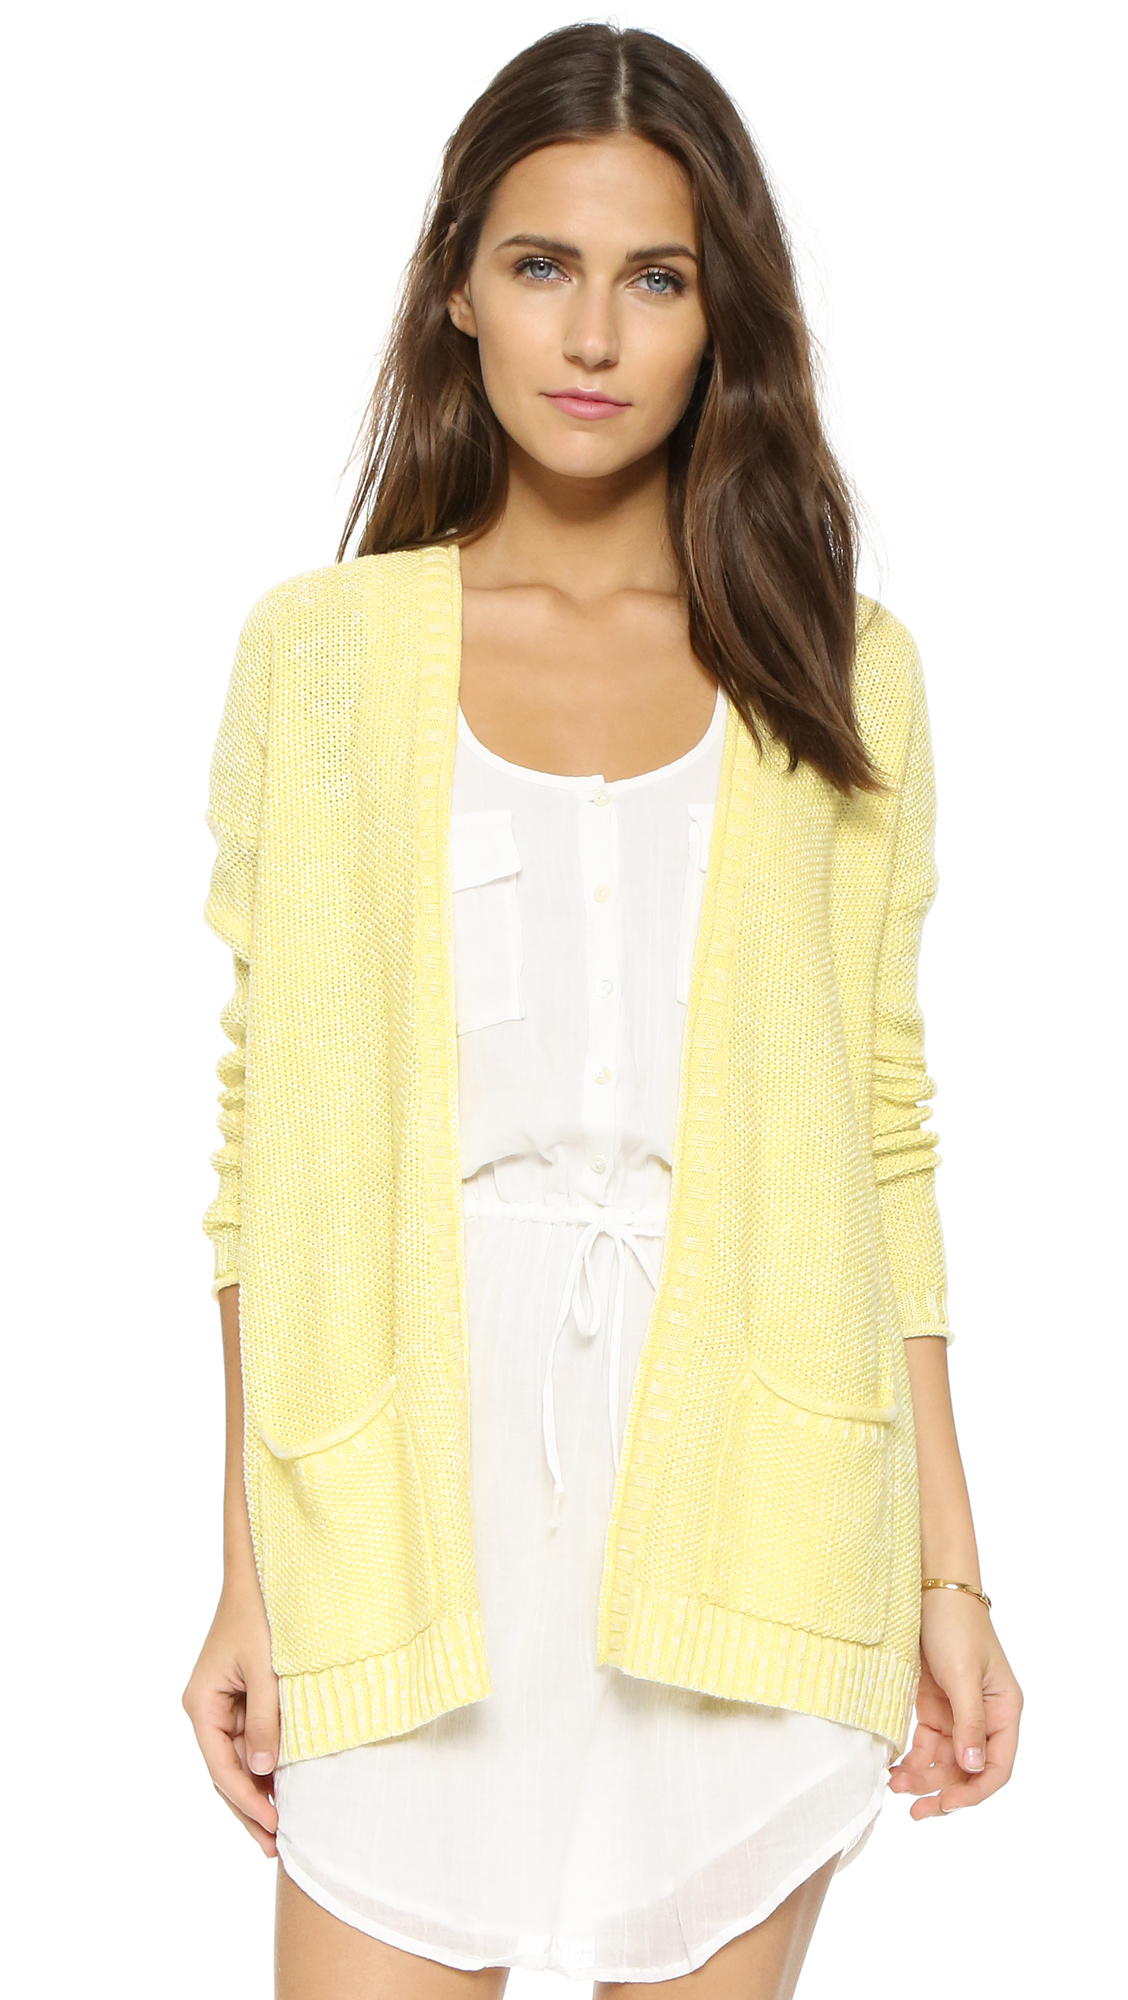 With bitcoin pale yellow cotton cardigan sweater shirt for women clothing